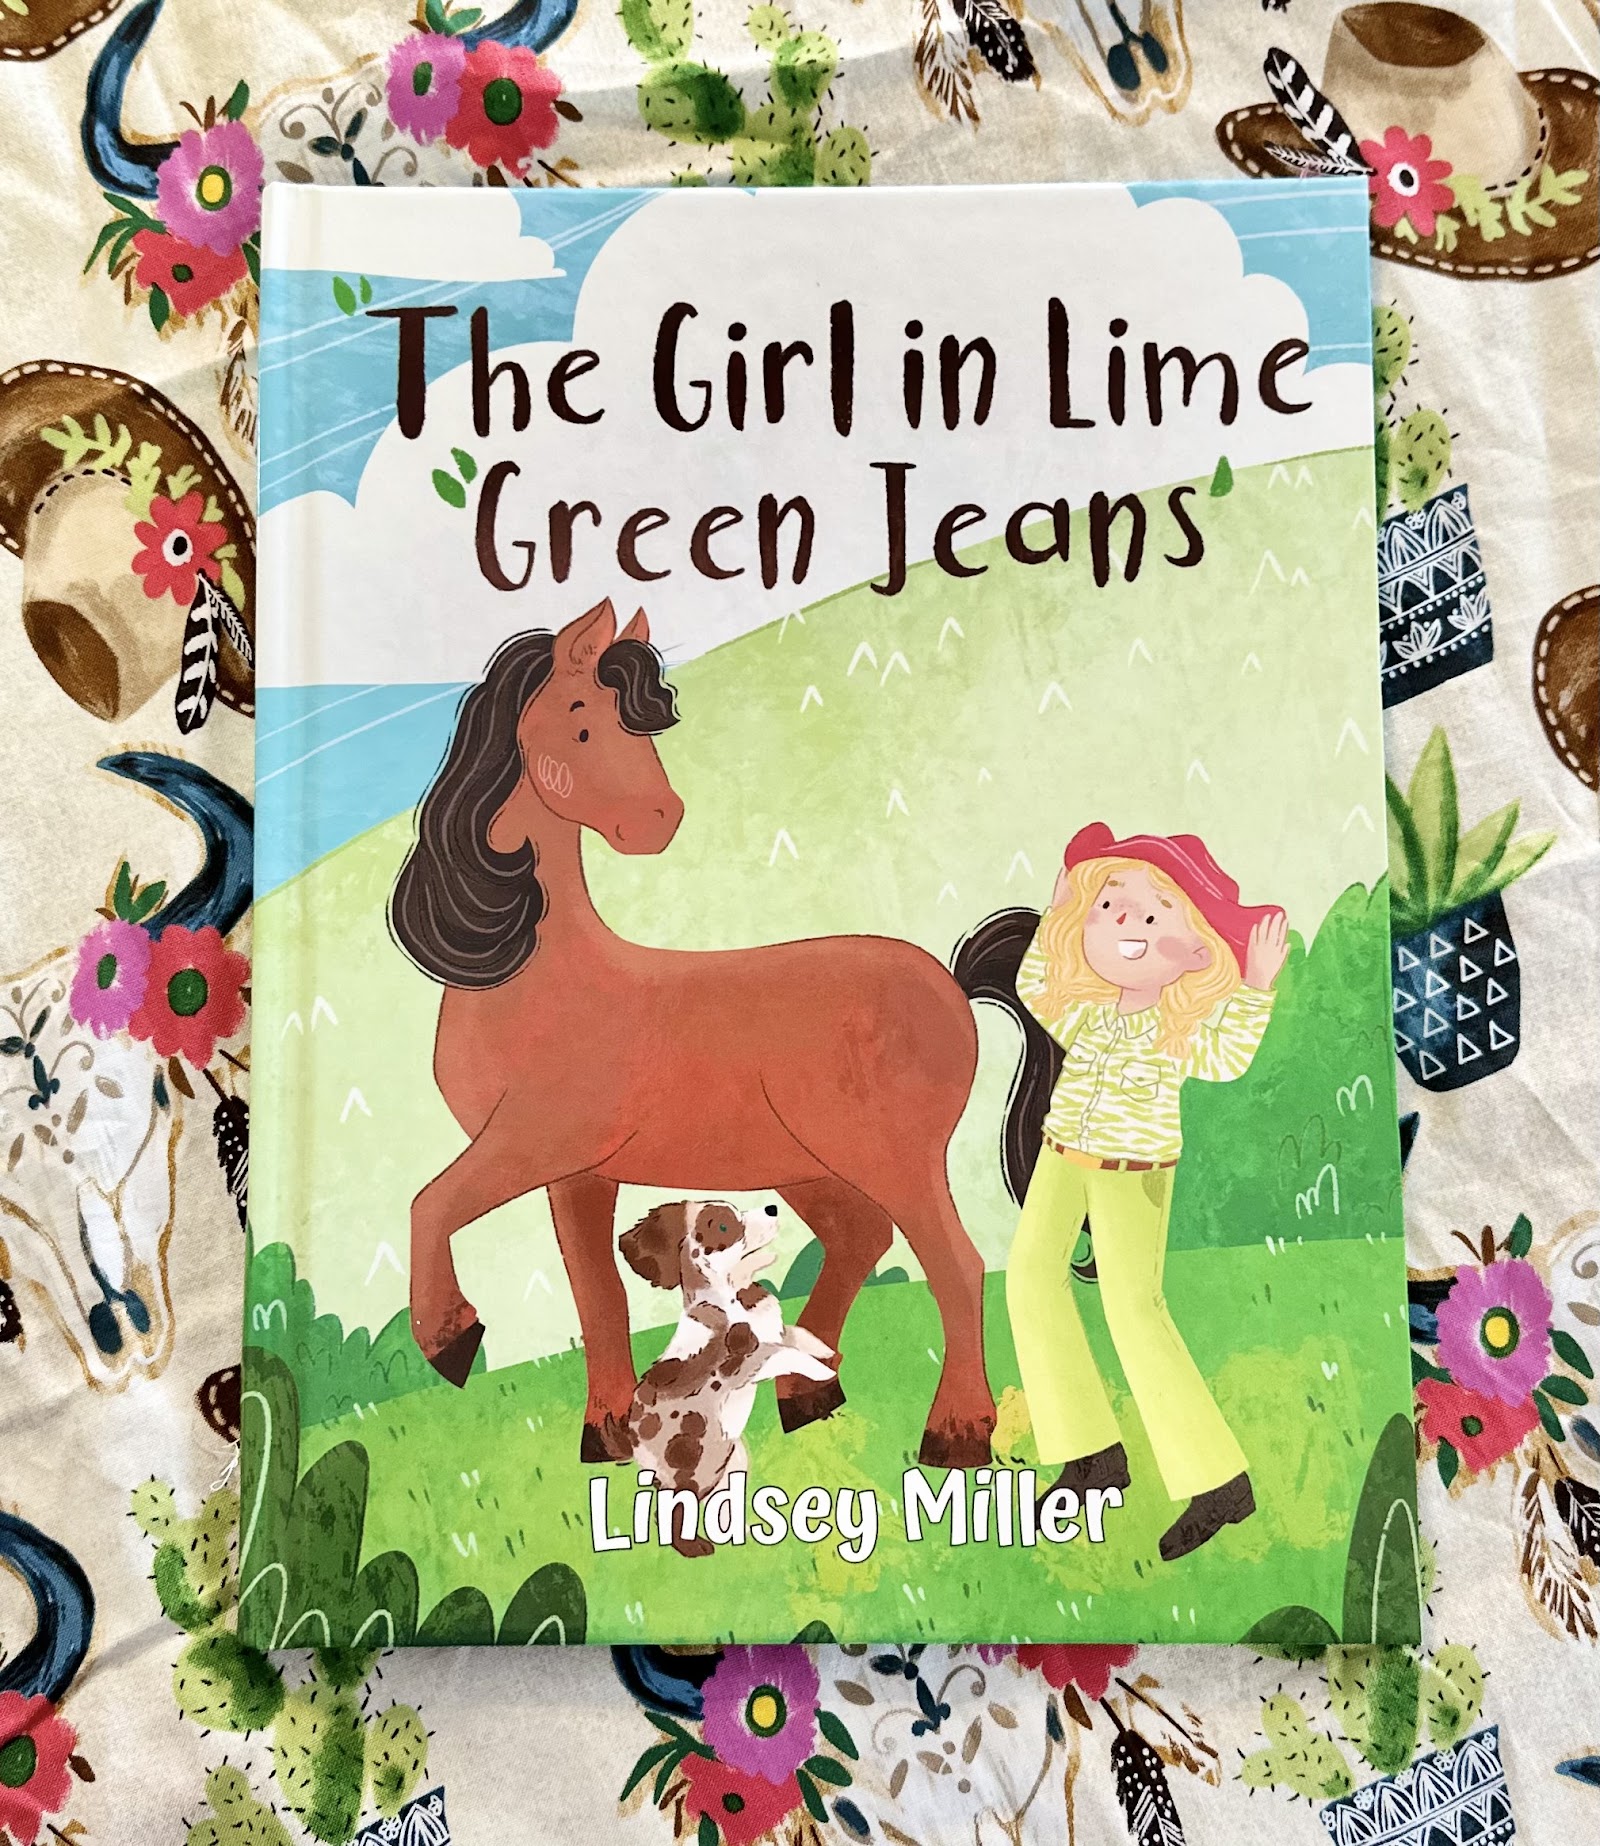  The Girl in Lime Green Jeans by Lindsey Miller